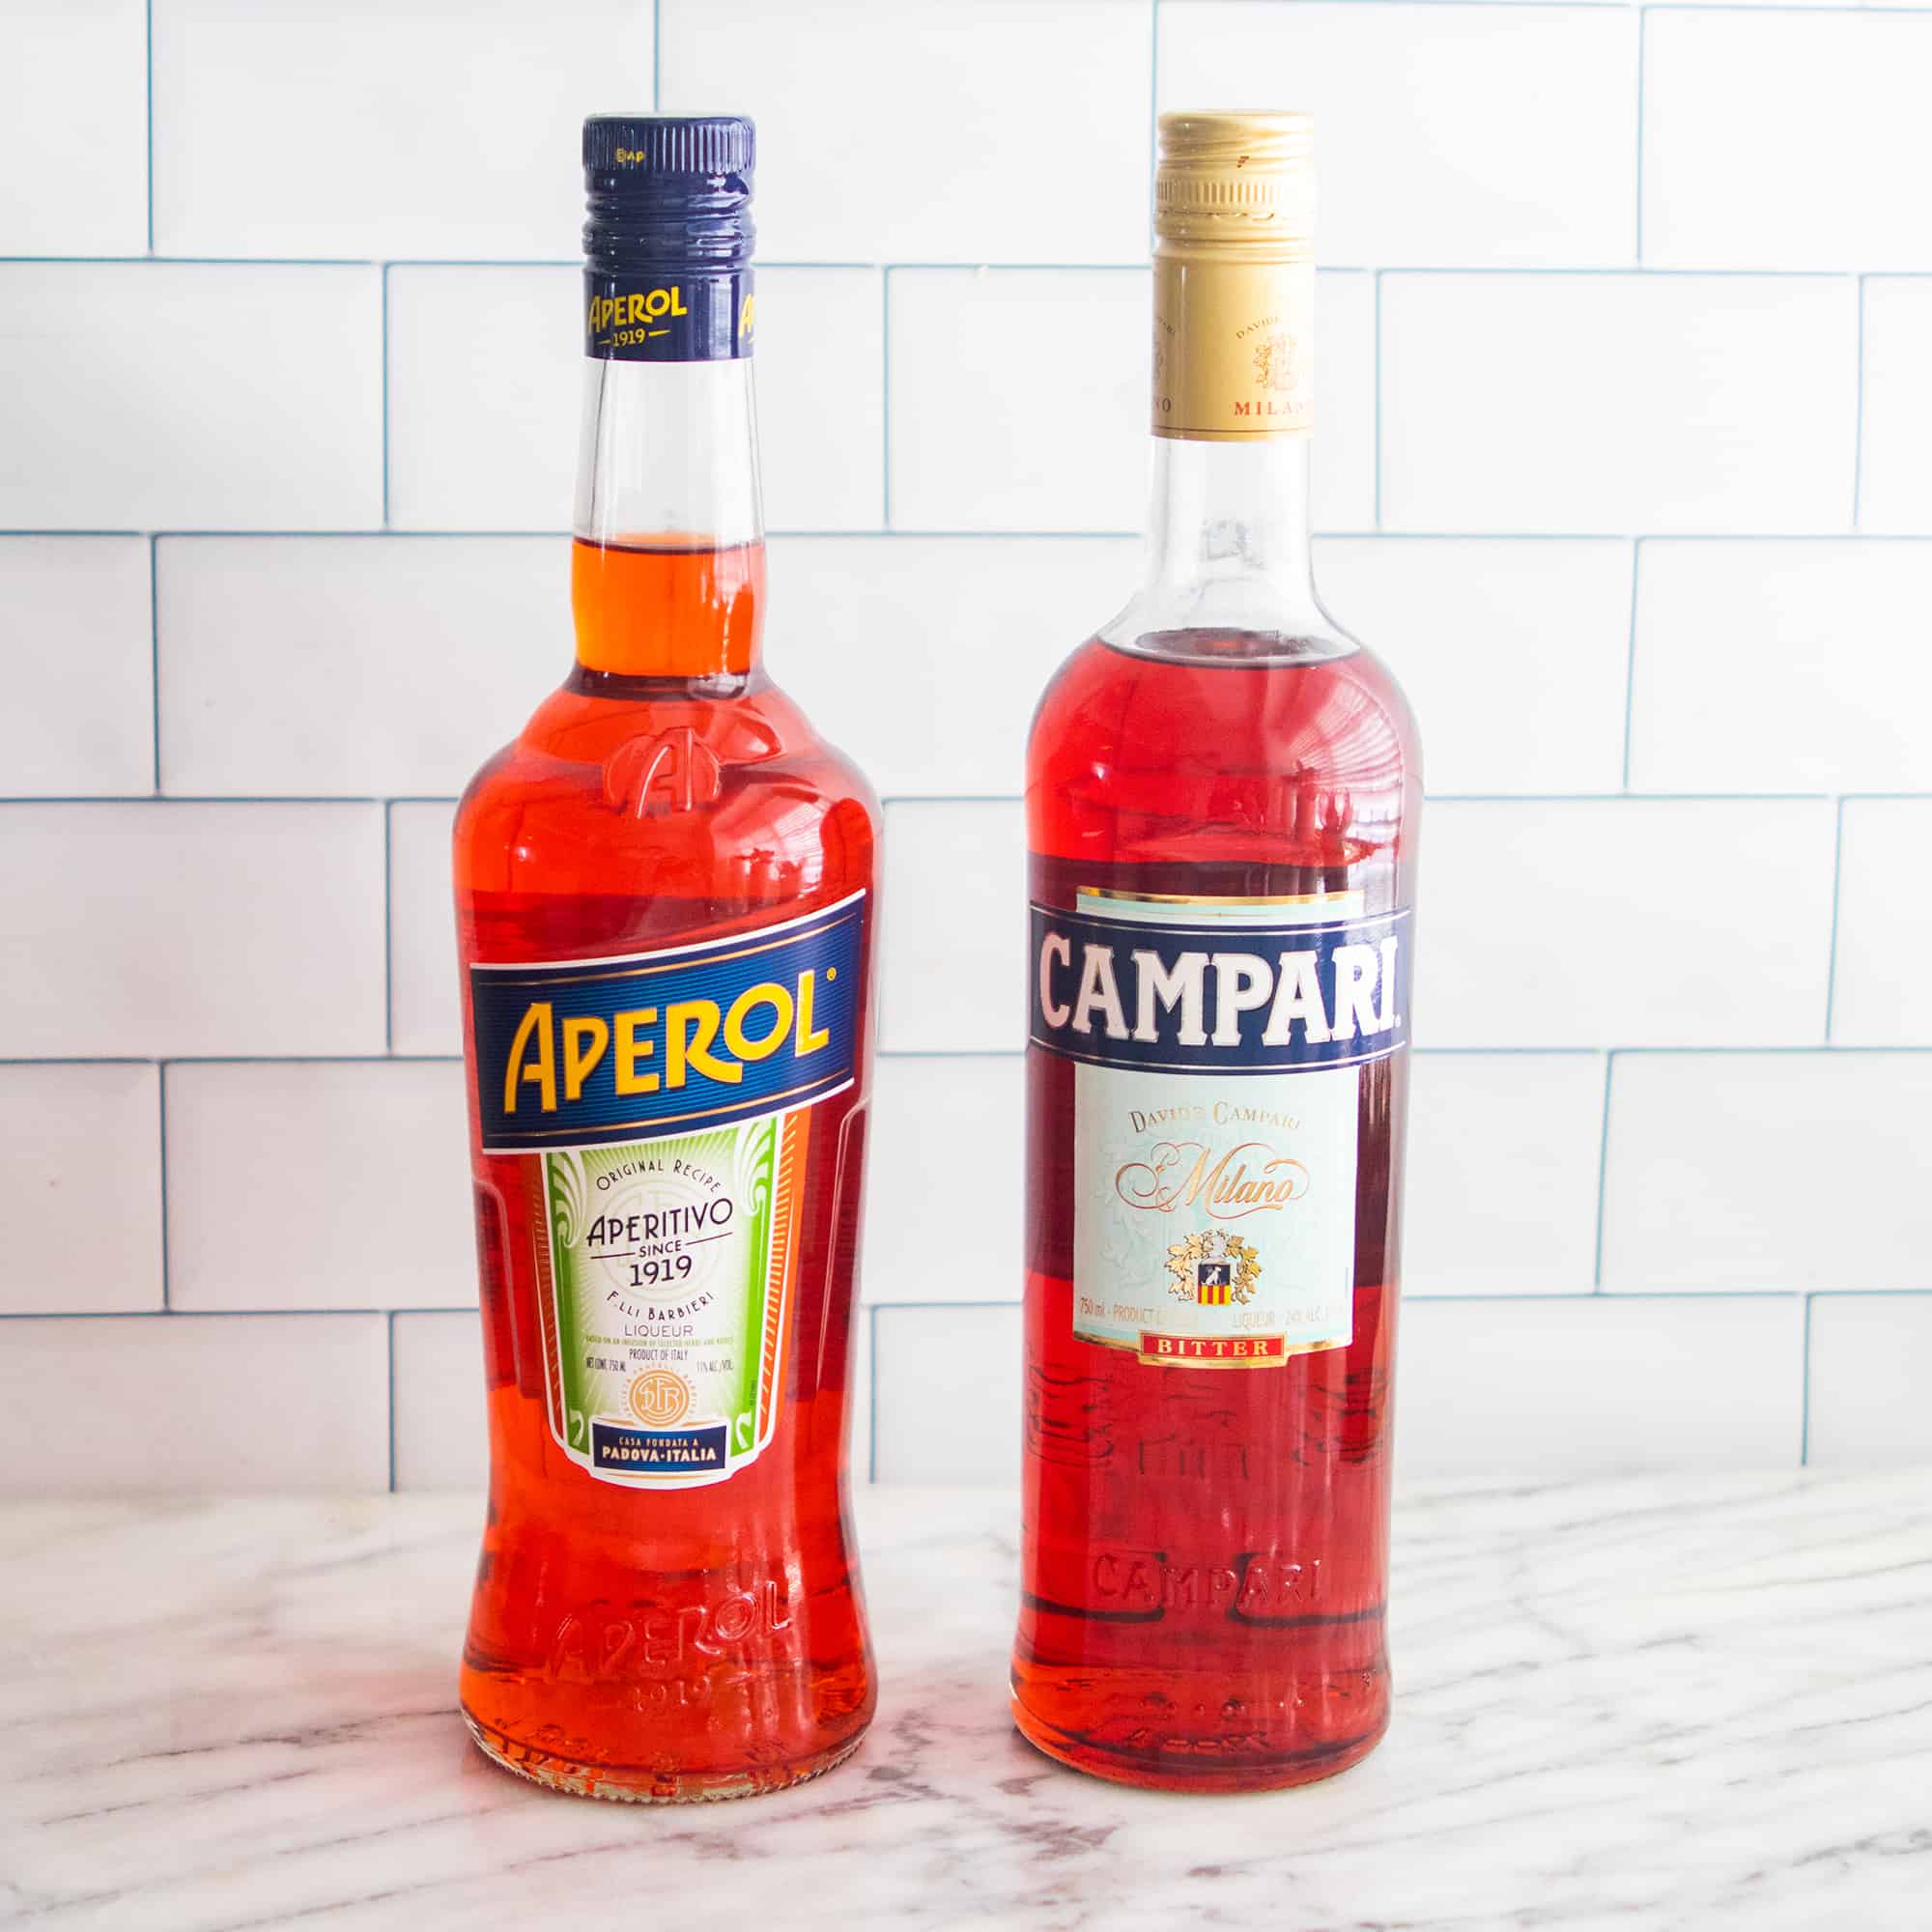 Campari and Aperol - What's The Difference? – Giadzy